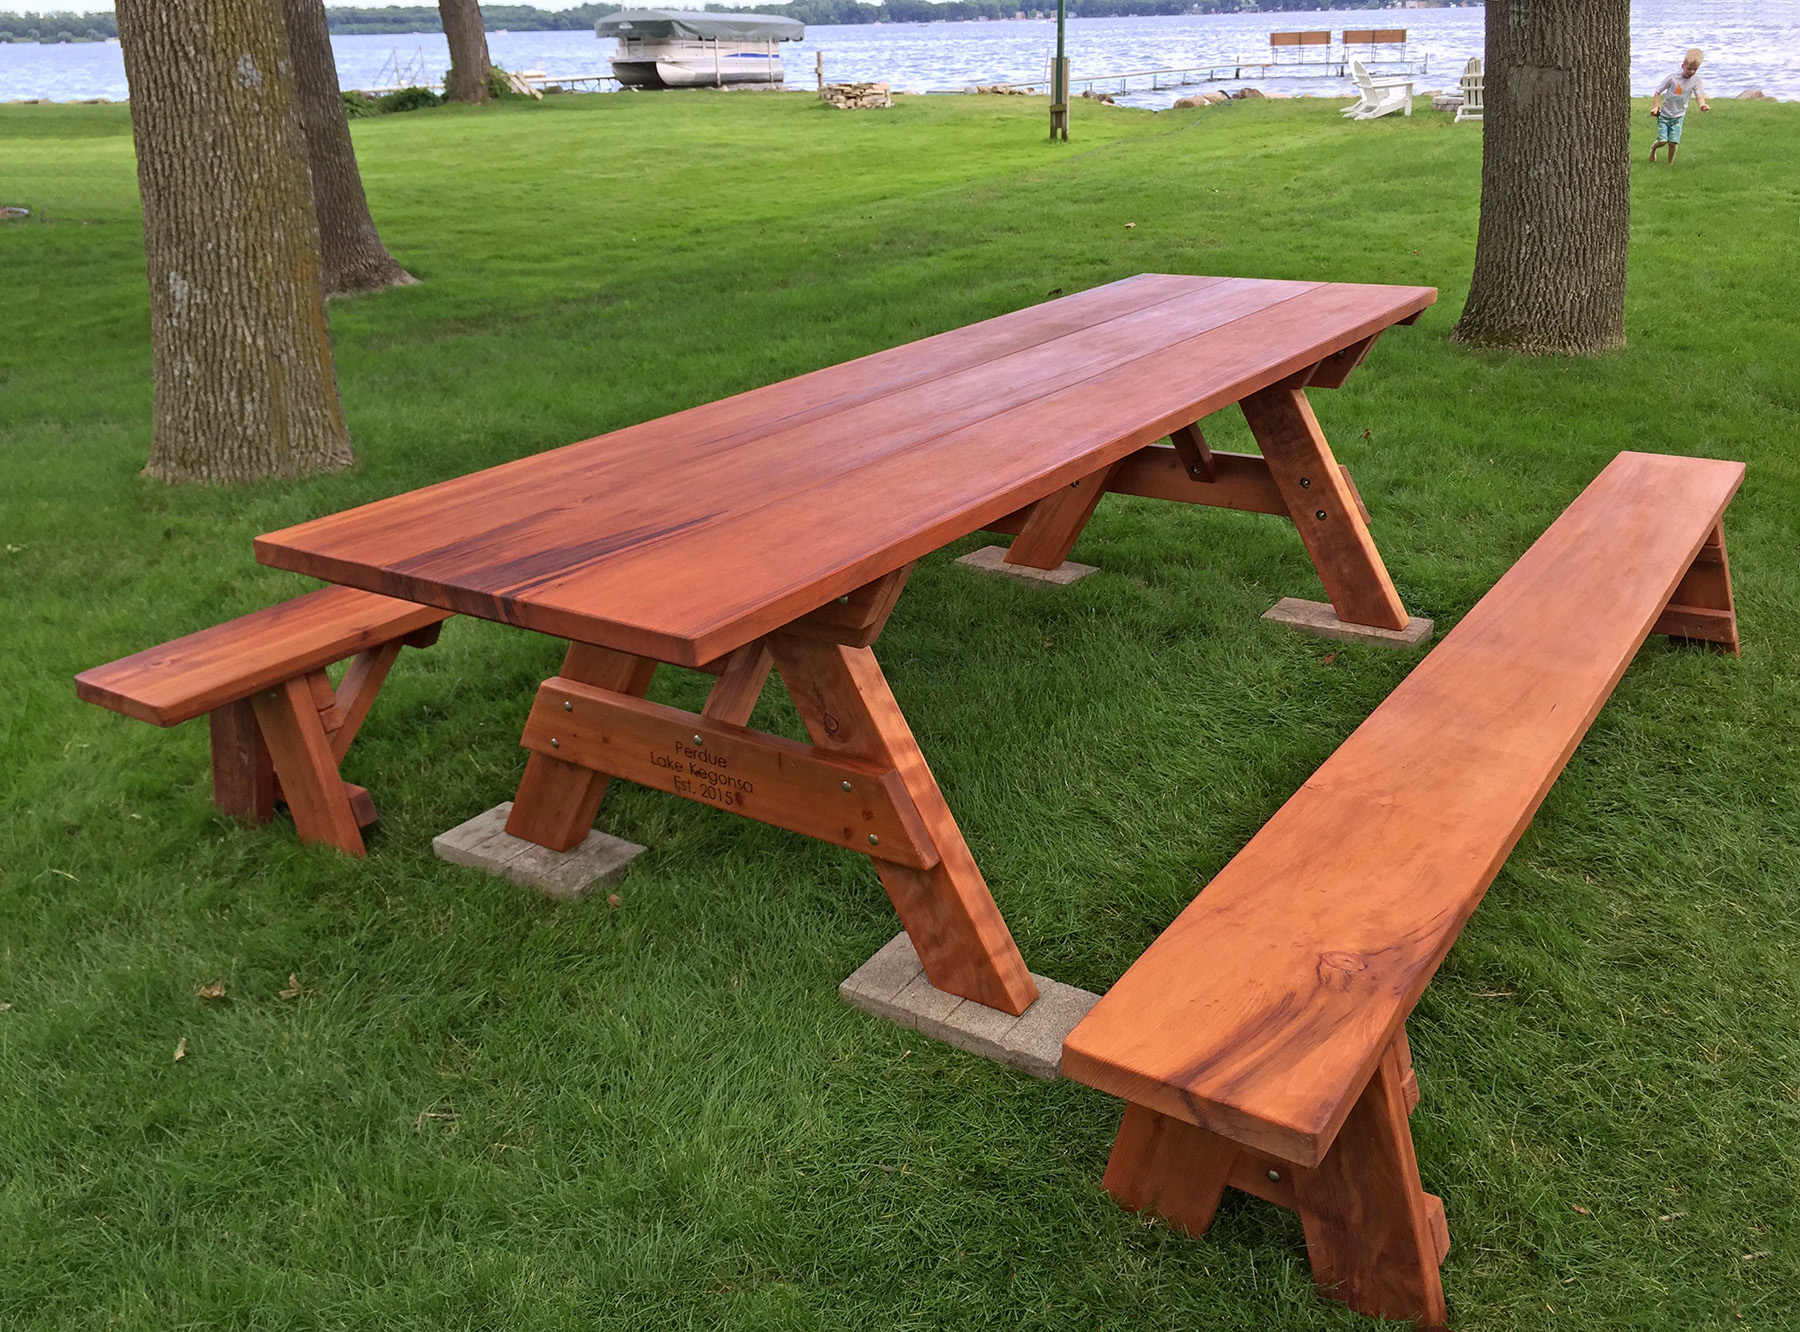 Large wooden picnic table